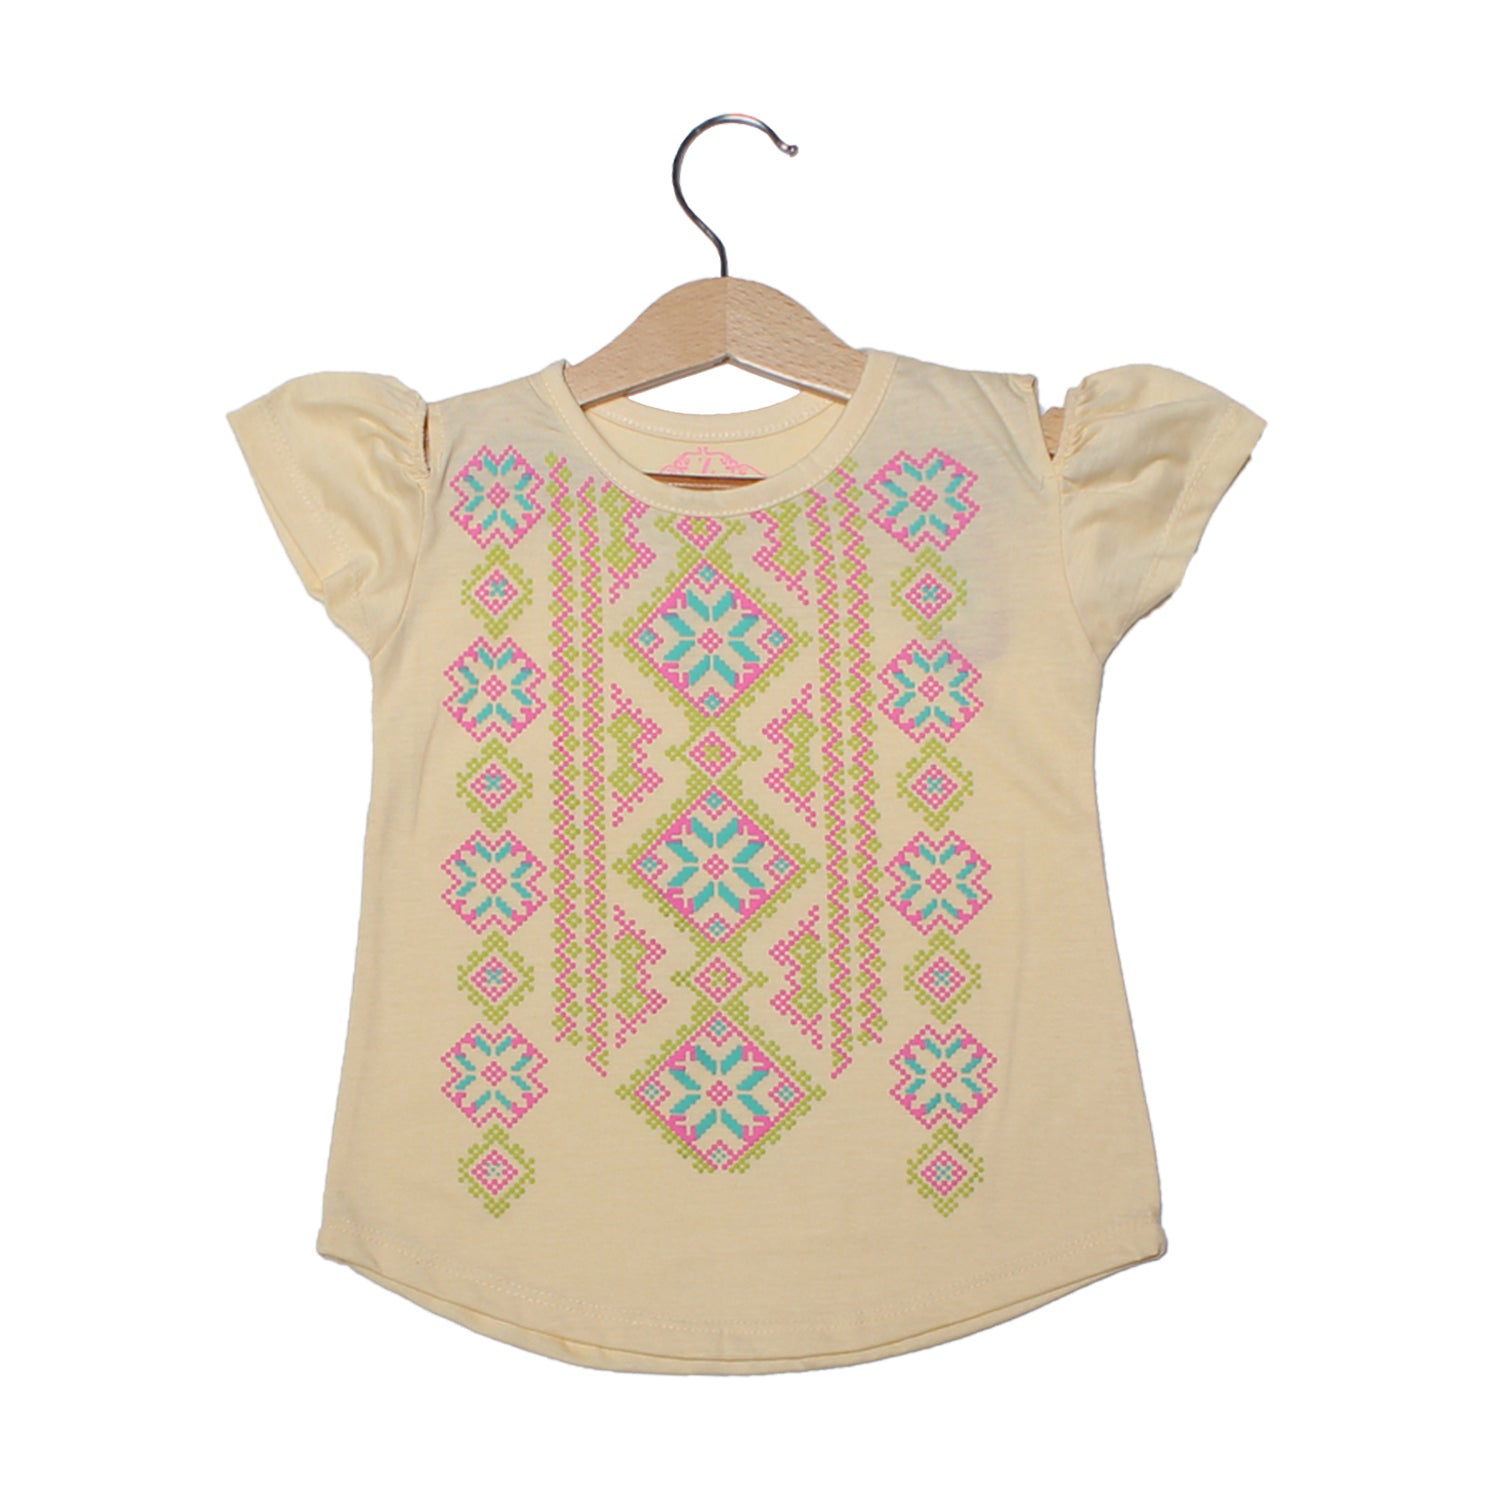 NEW CREAM COLD SHOULDER DESIGN PRINTED T-SHIRT TOP FOR GIRLS